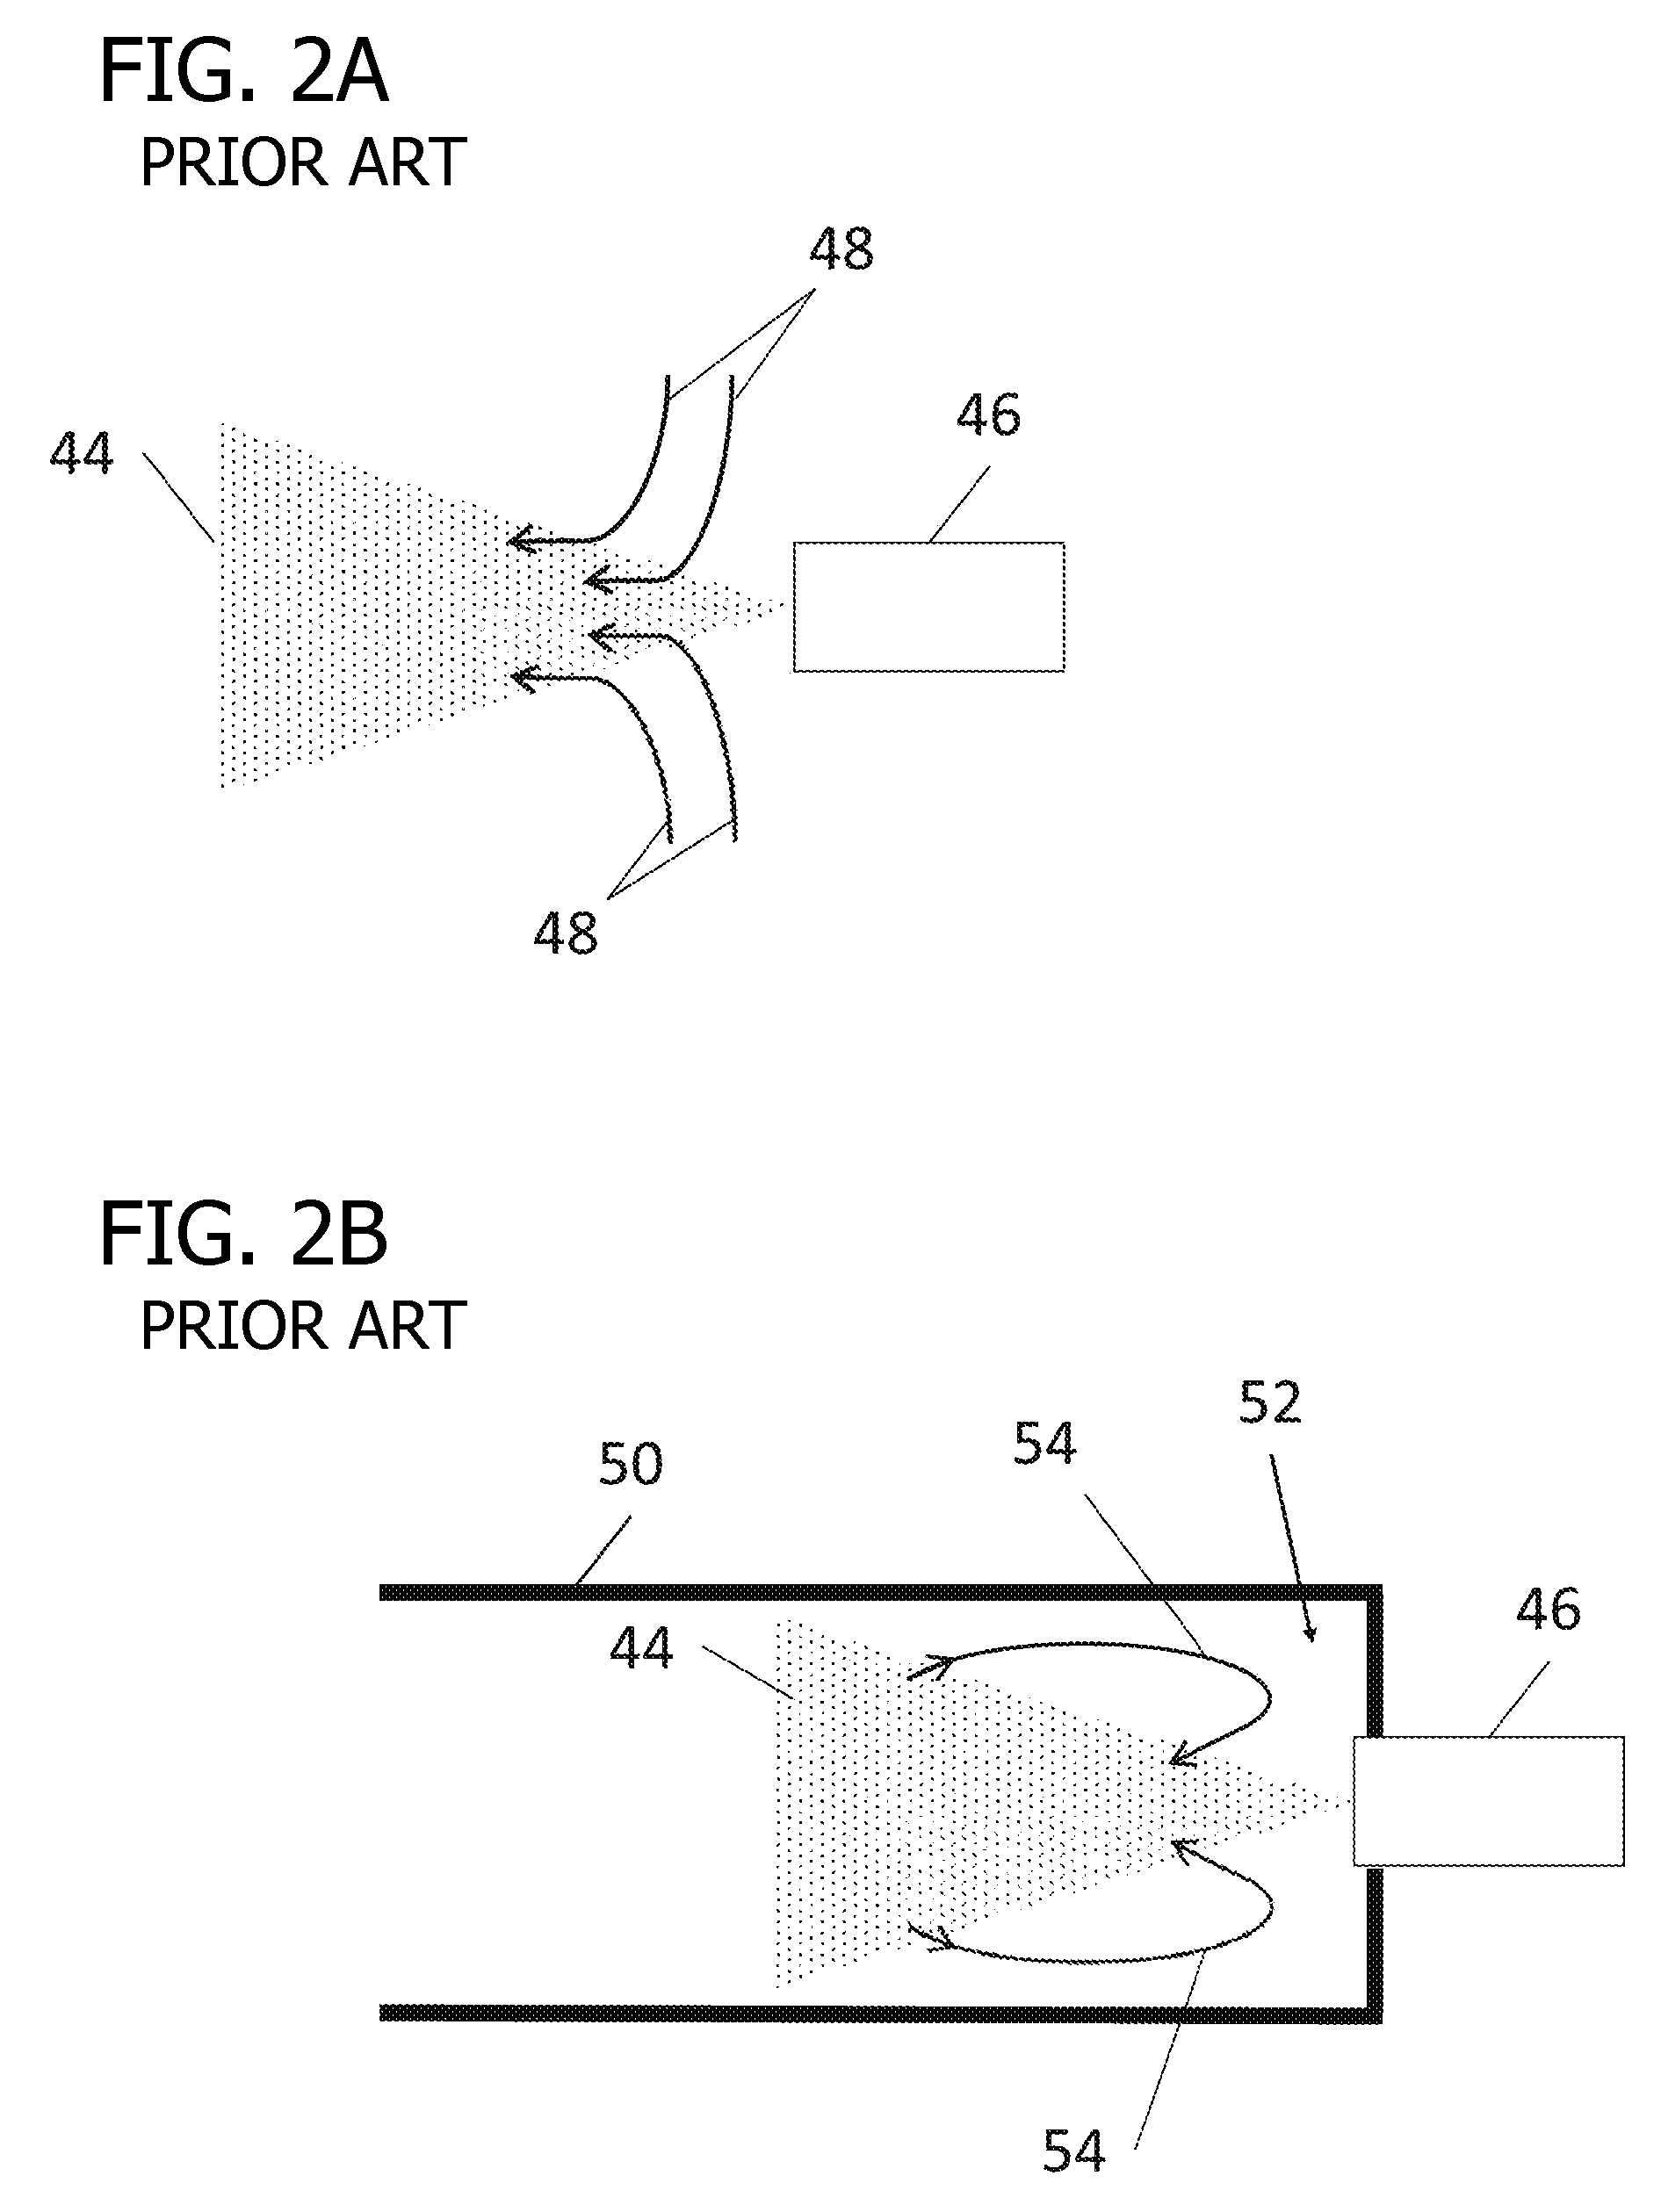 Sample transferring apparatus for mass cytometry